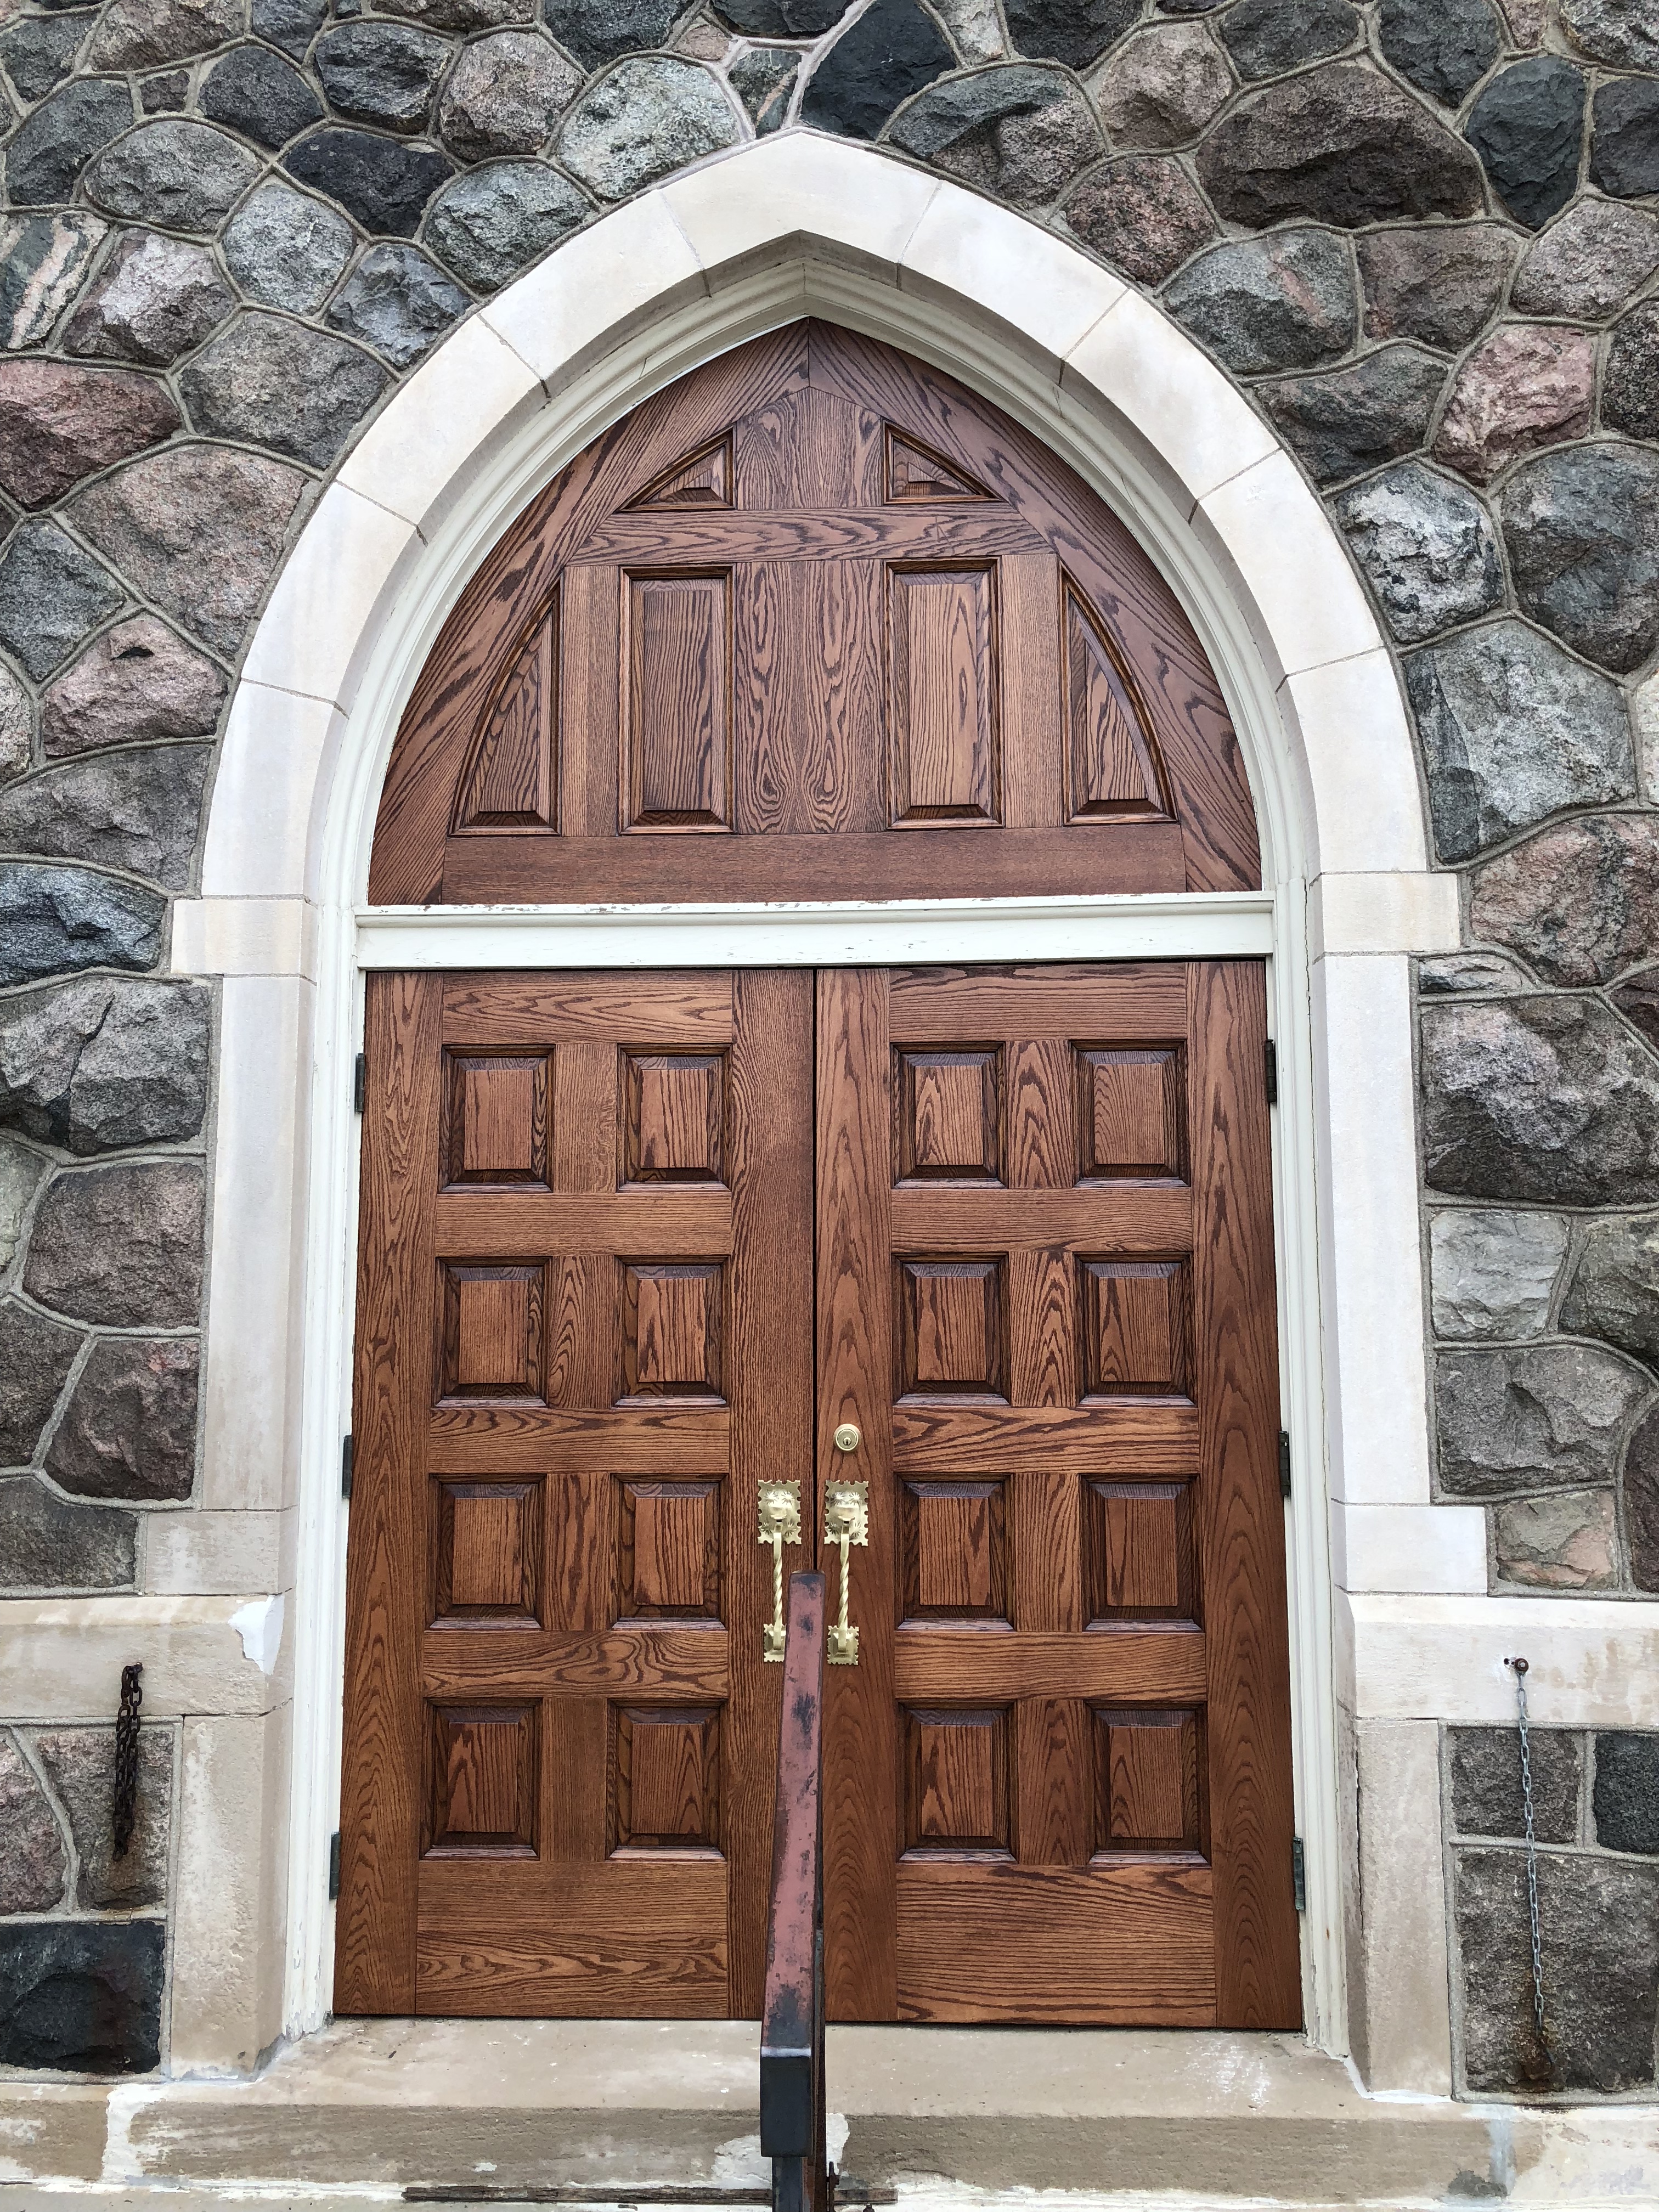 A church door with two wooden doors and a stone wall.